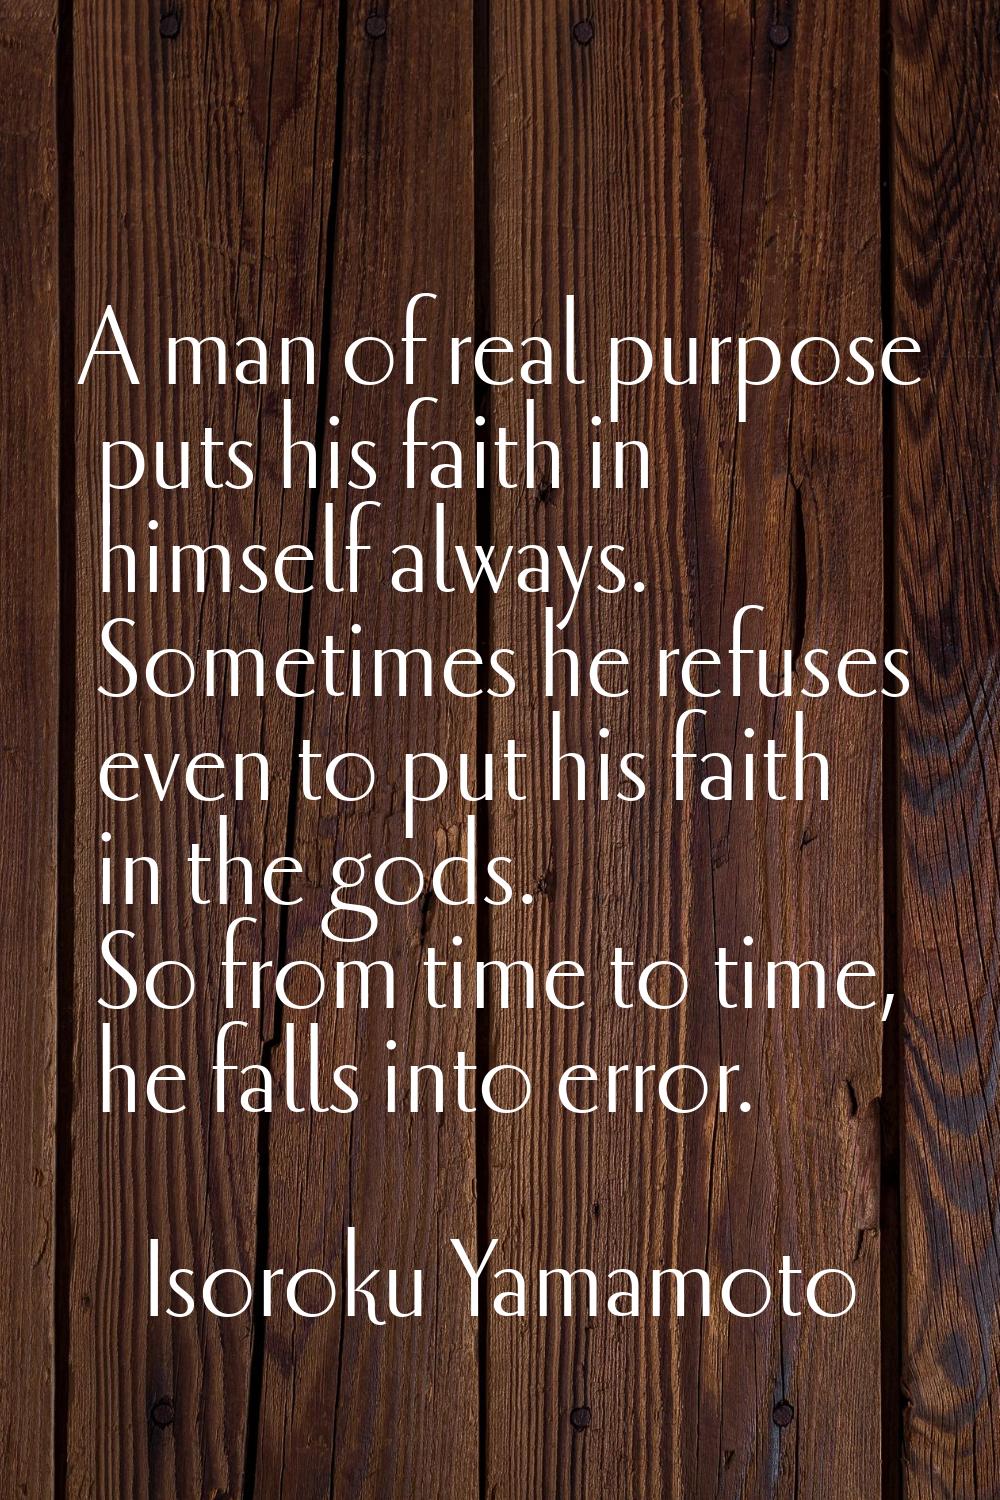 A man of real purpose puts his faith in himself always. Sometimes he refuses even to put his faith 